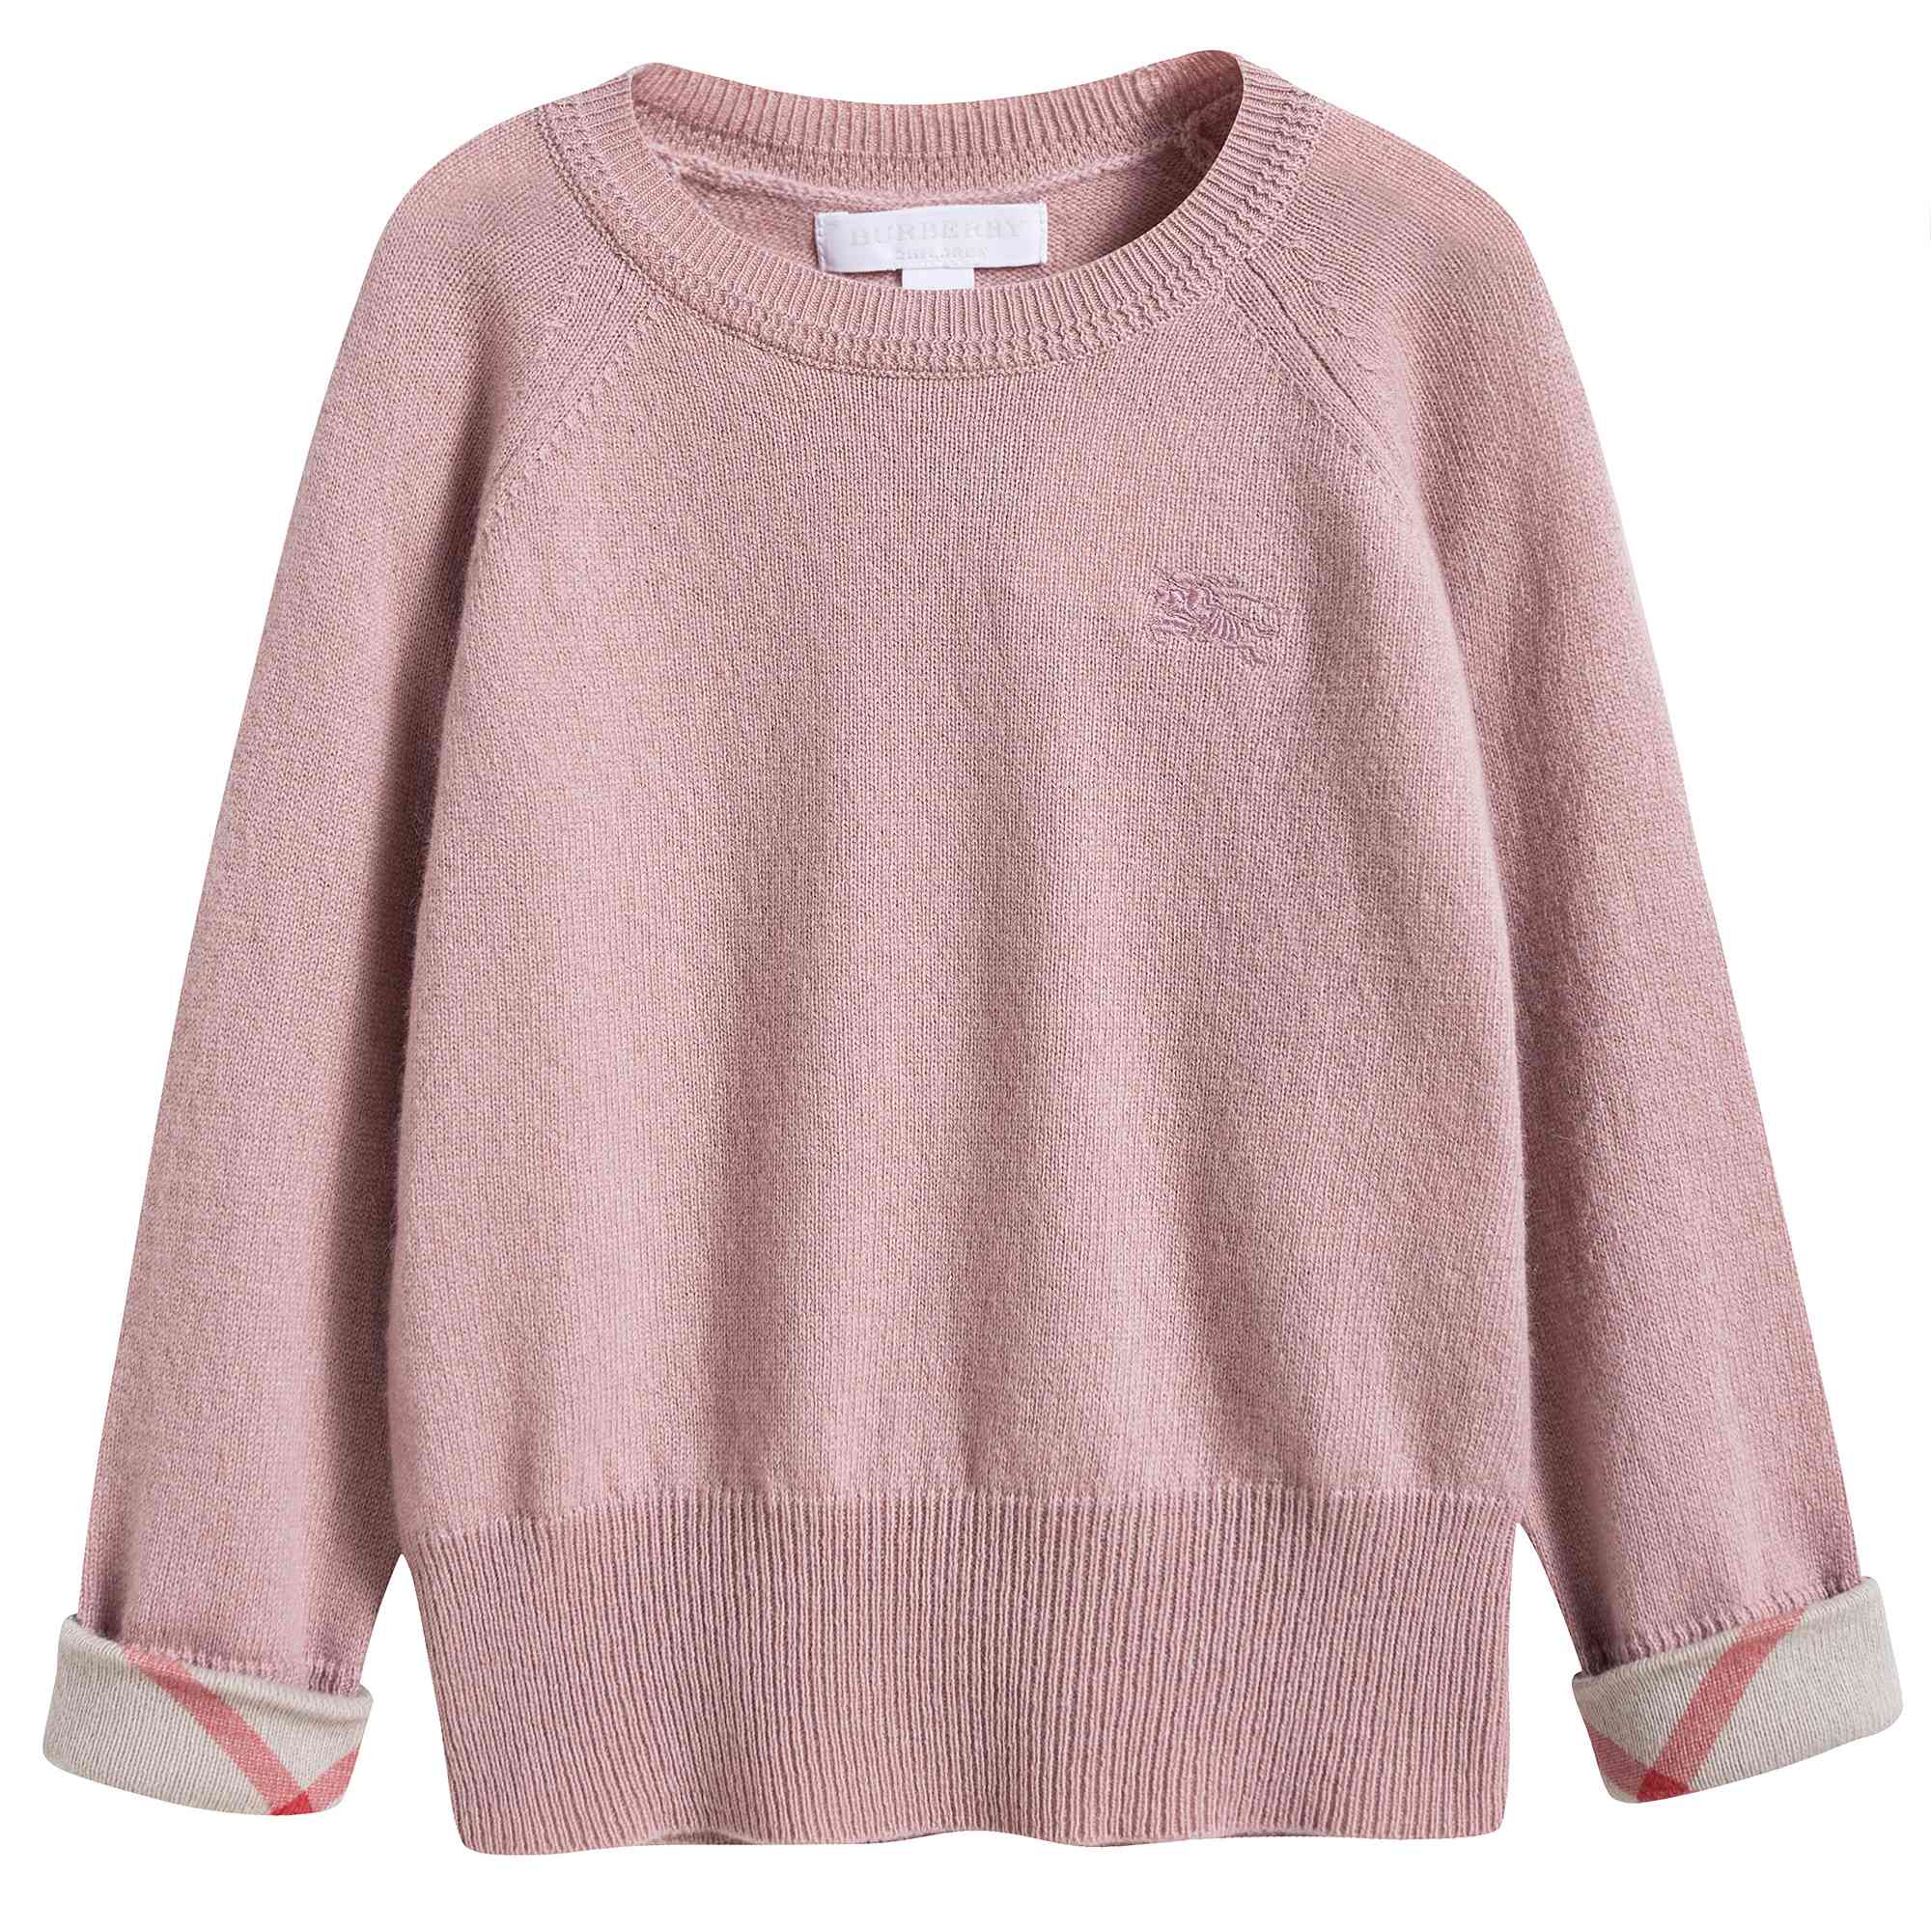 Girls Dusty Pink Cashmere Sweater